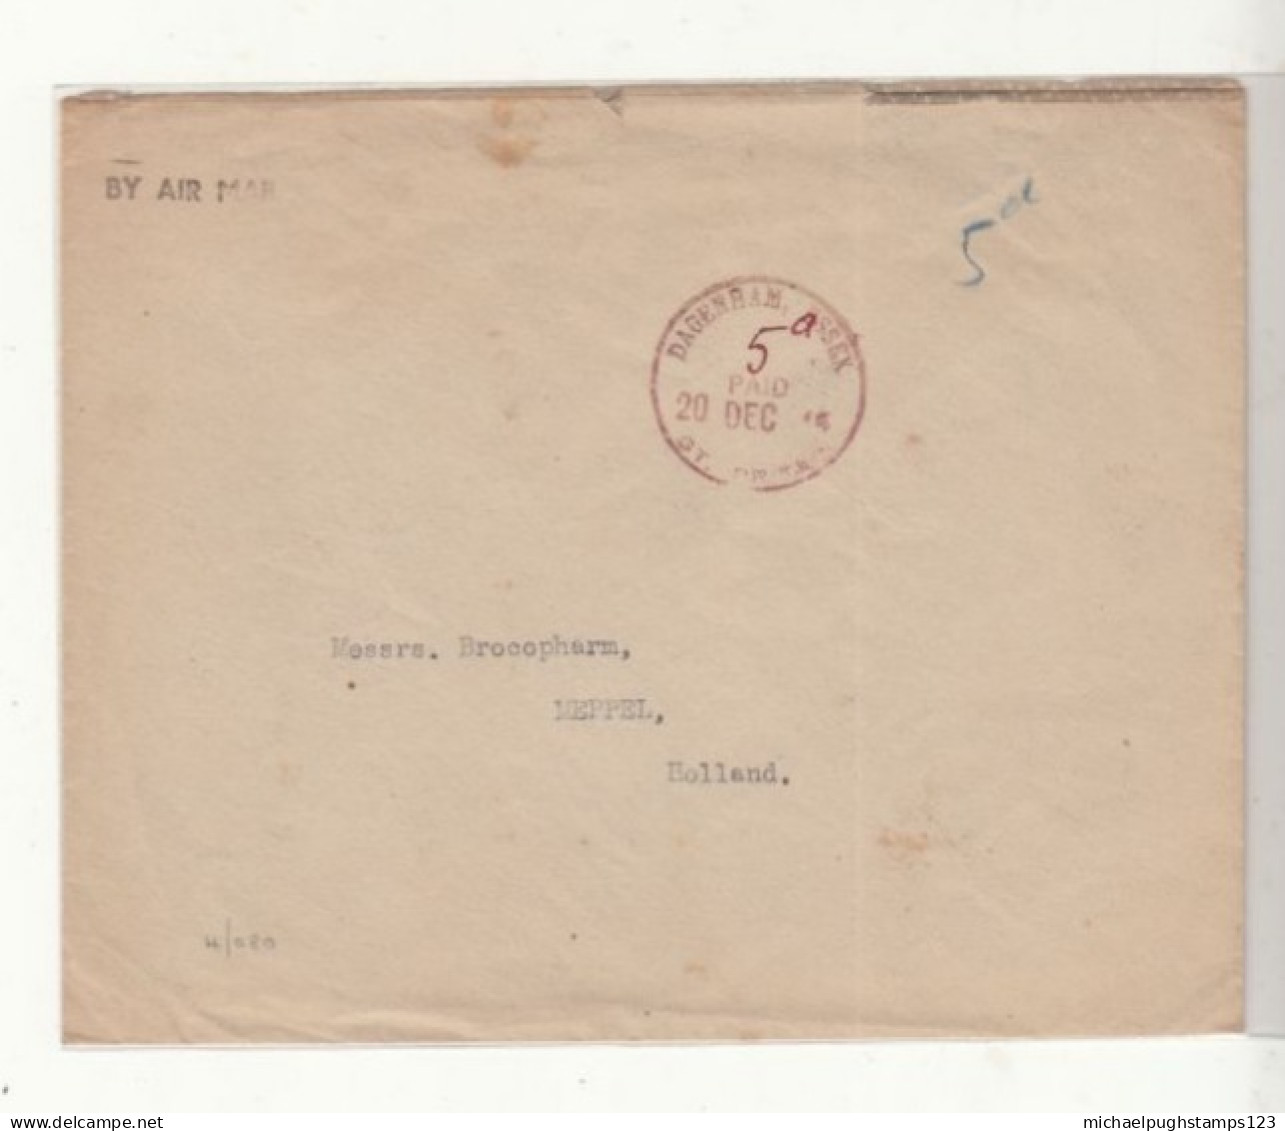 G.B. / London / Essex / Paid Marks / Airmail / Emergency Postmarks / Paid Cash - Unclassified